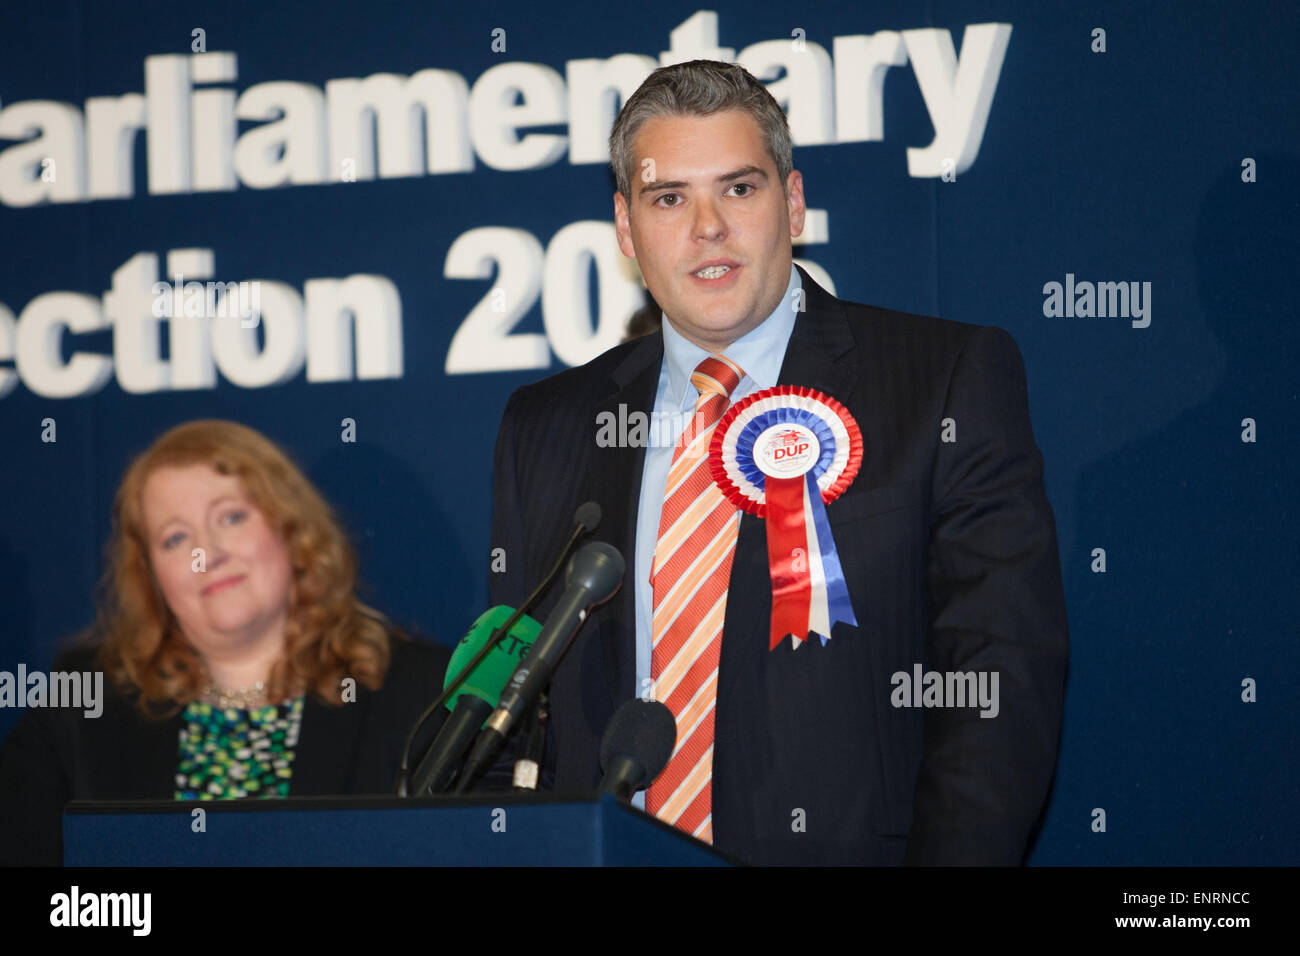 Belfast UK. 7th May 2015 General Election:  Gavin Robinson from the Democratic Unionist Party (DUP) giving his acceptance speech Stock Photo